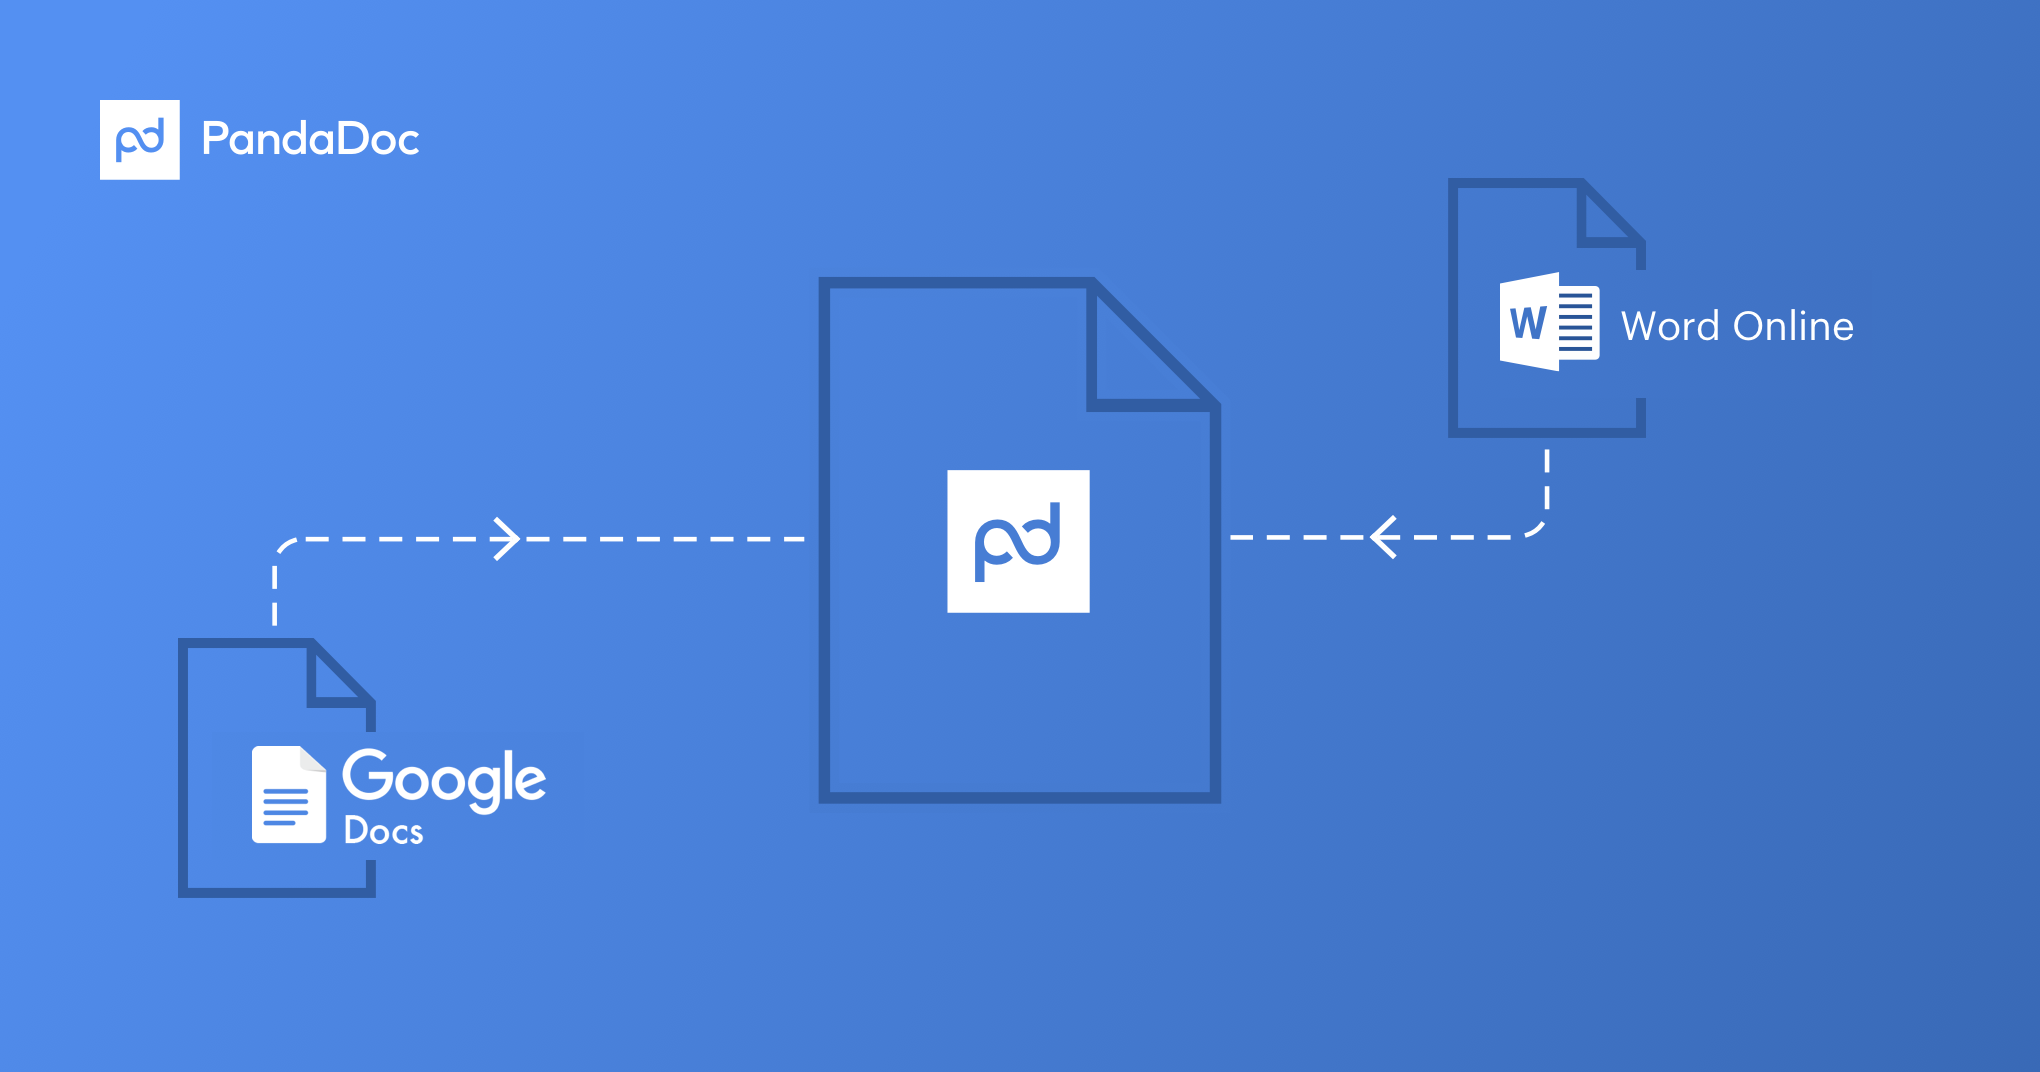 July updates: Create editable documents from Google Docs or Word 365